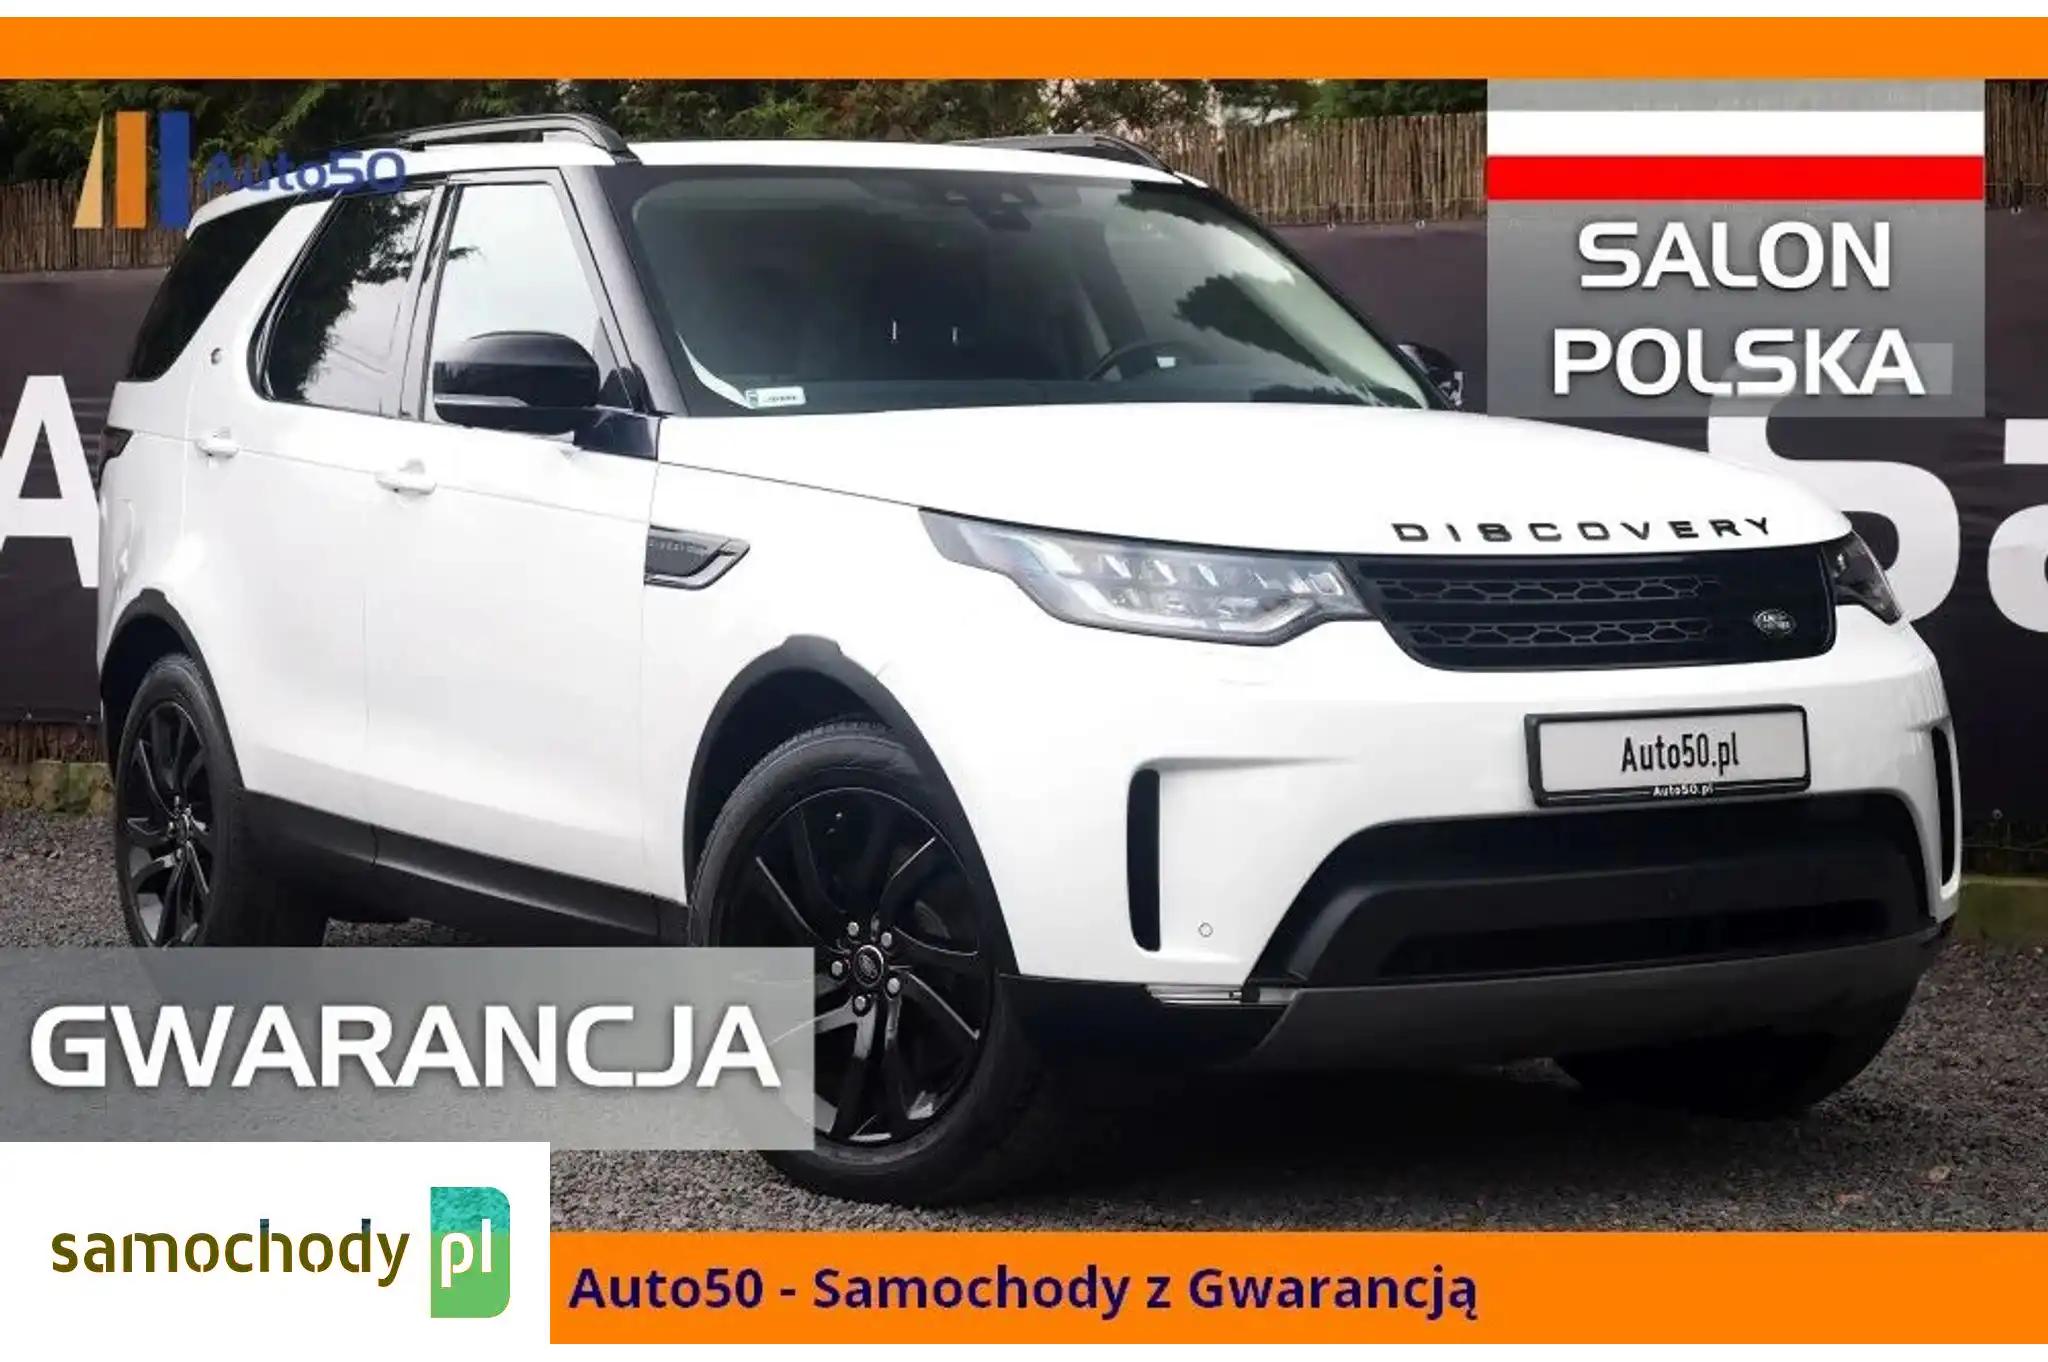 Land Rover Discovery SUV 2017